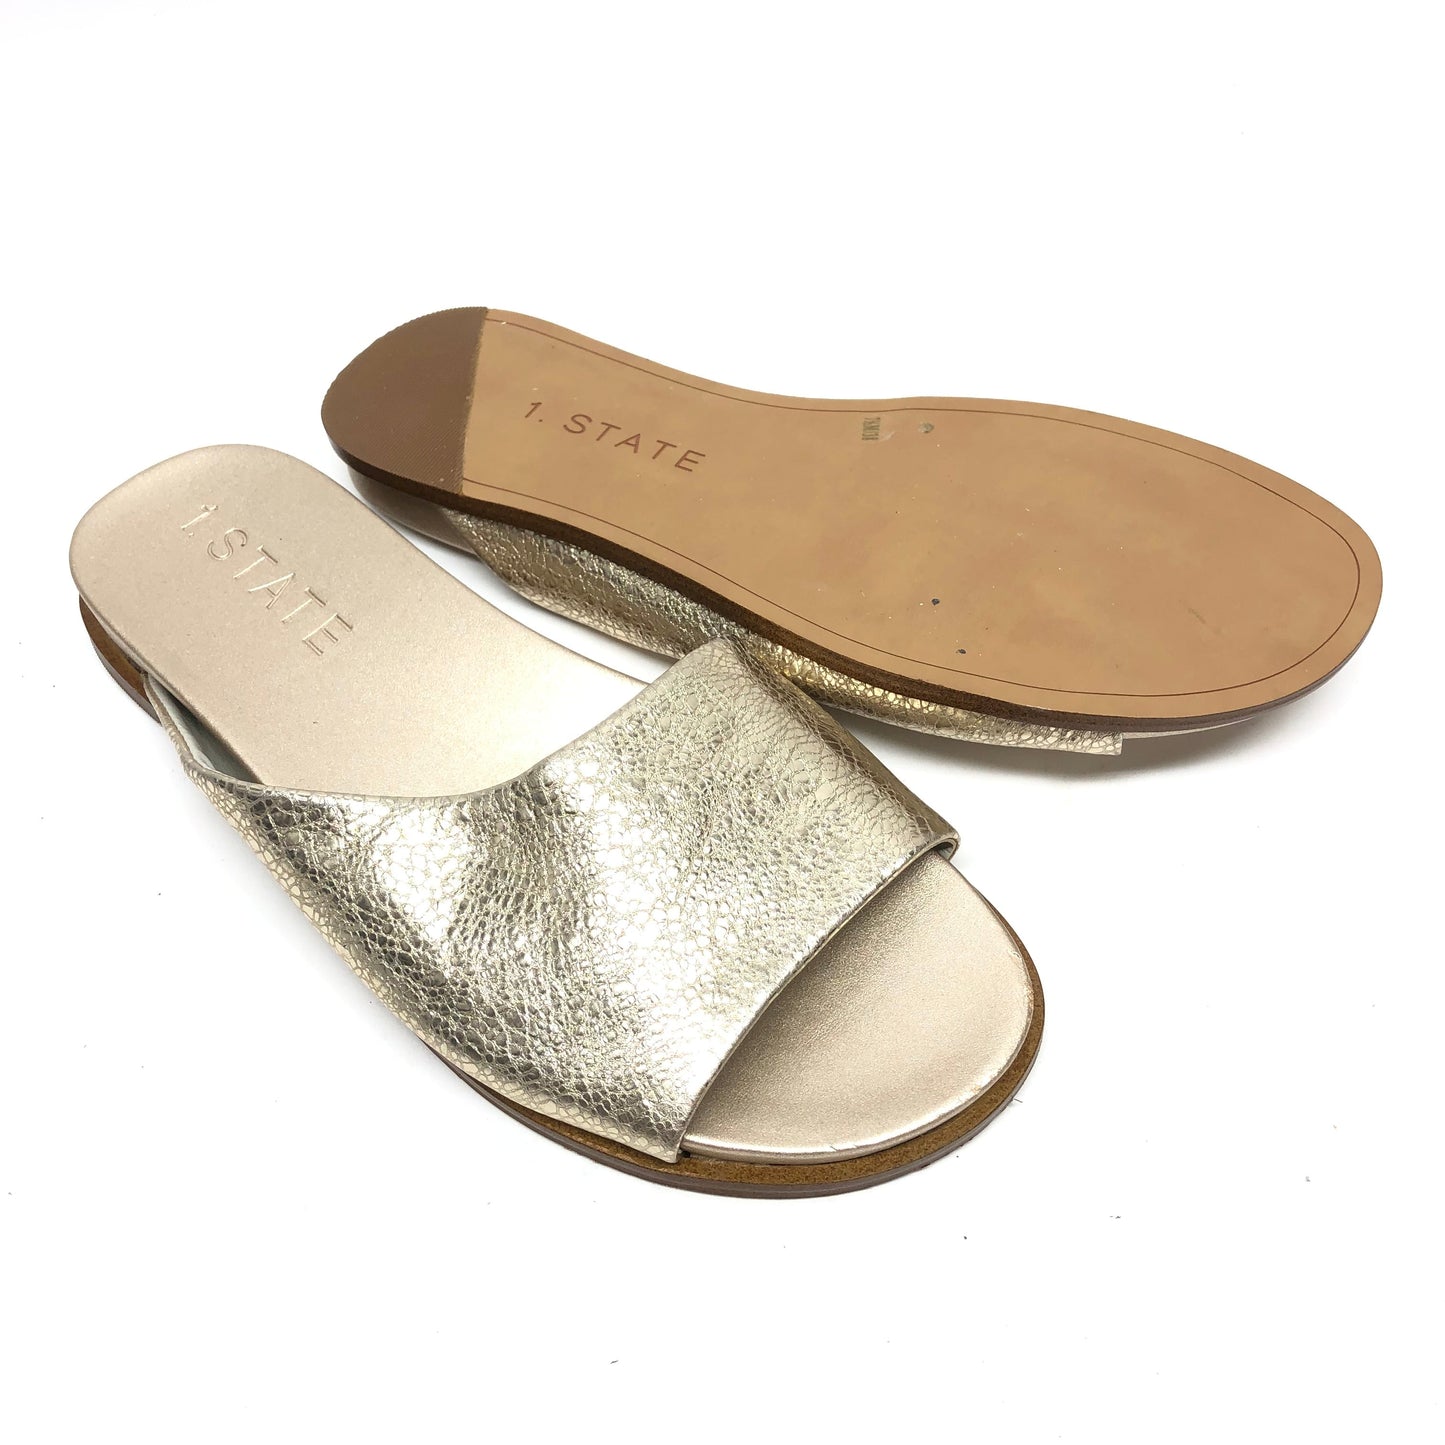 Gold Sandals Flats 1.state, Size 7.5